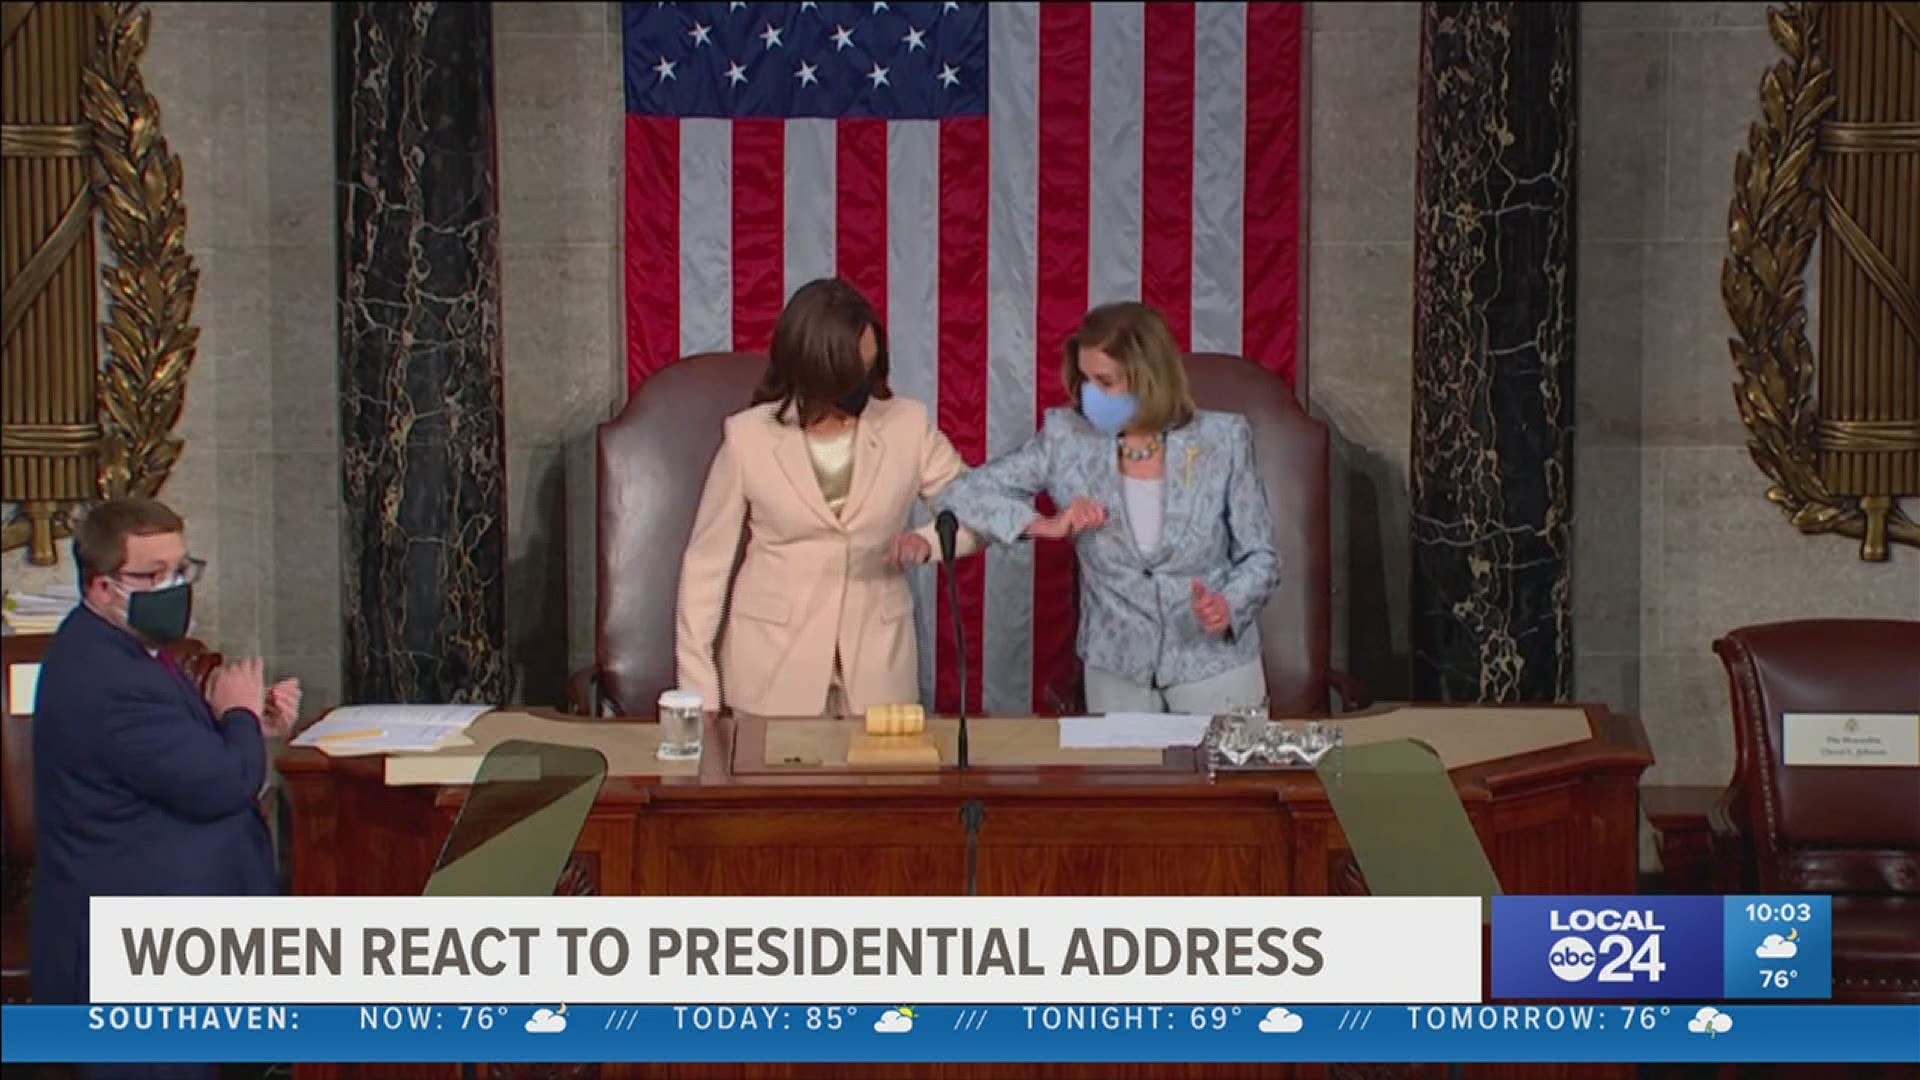 "Well, it only took us 242 years to have this moment. To have a moment when a Vice President and Speaker of the House were both women," says Deborah Clubb.